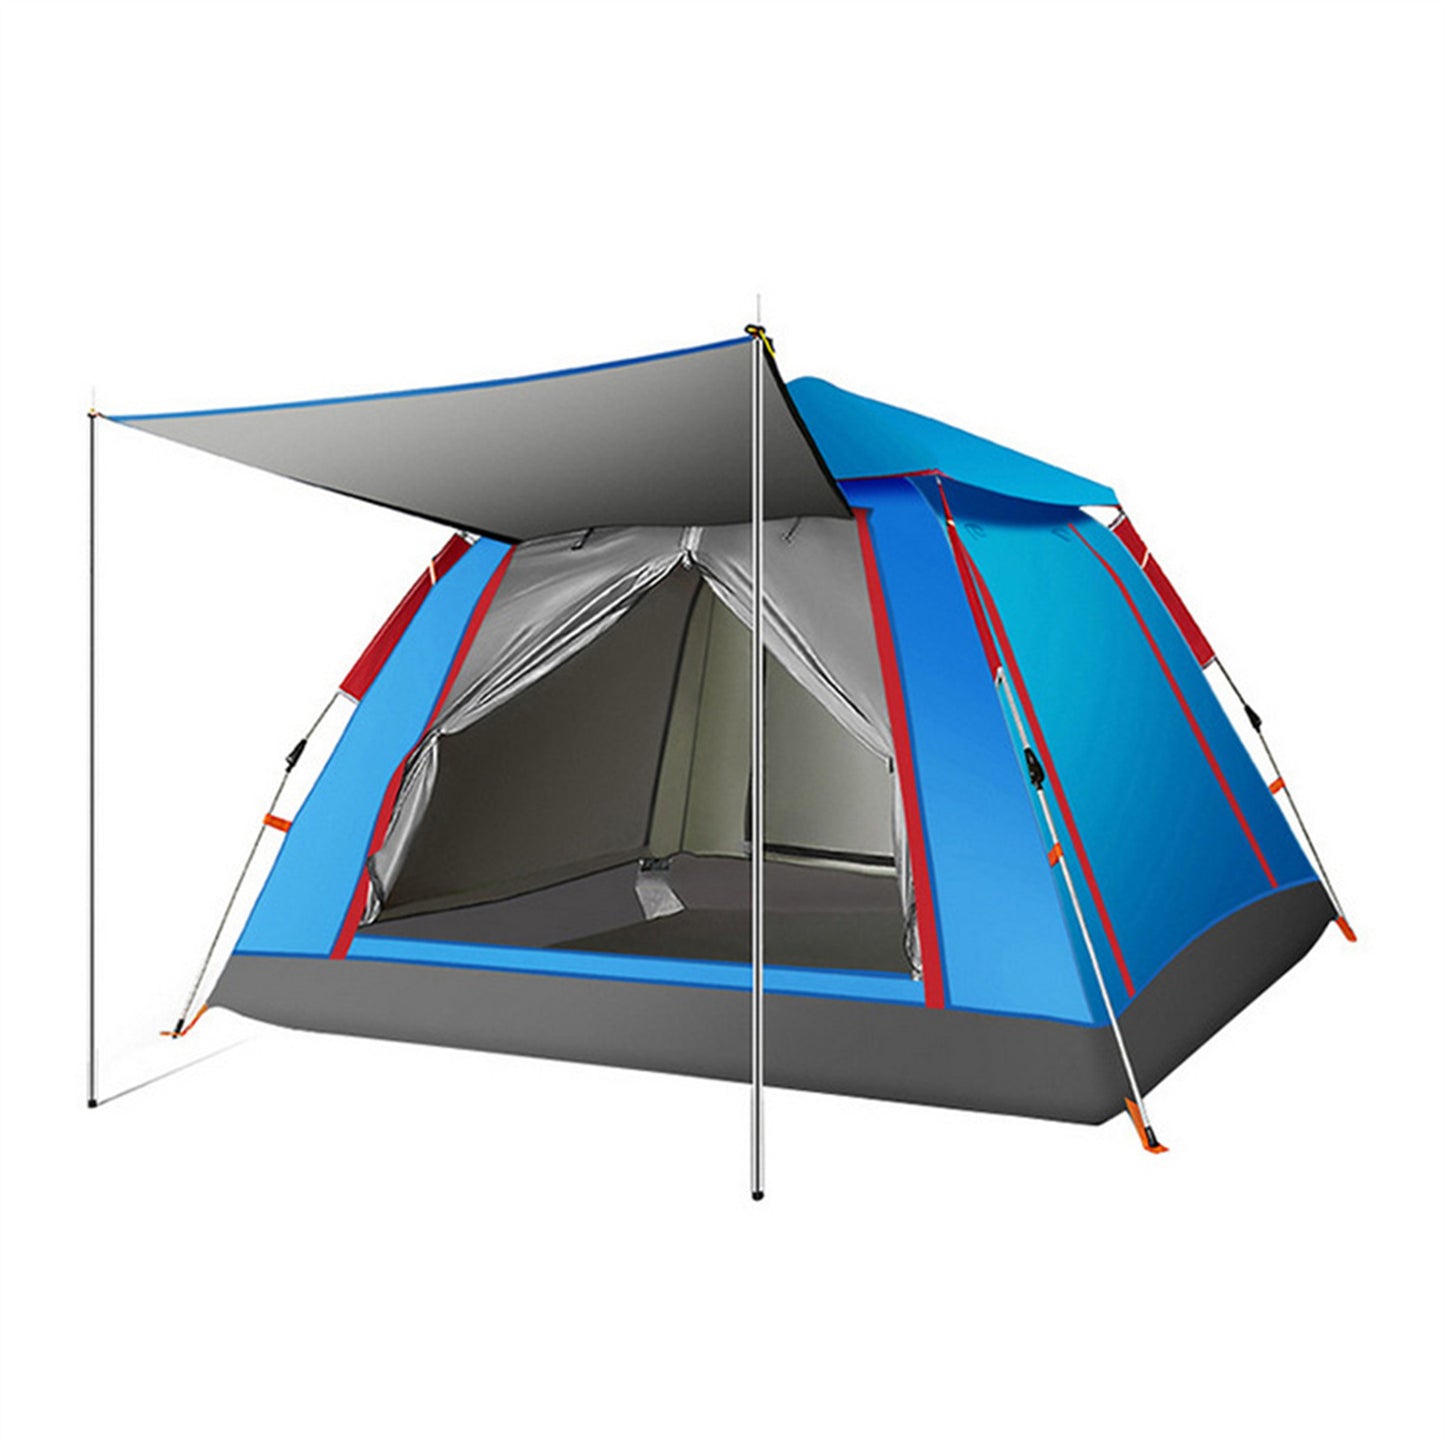 Single layer 2-3 person automatic tent